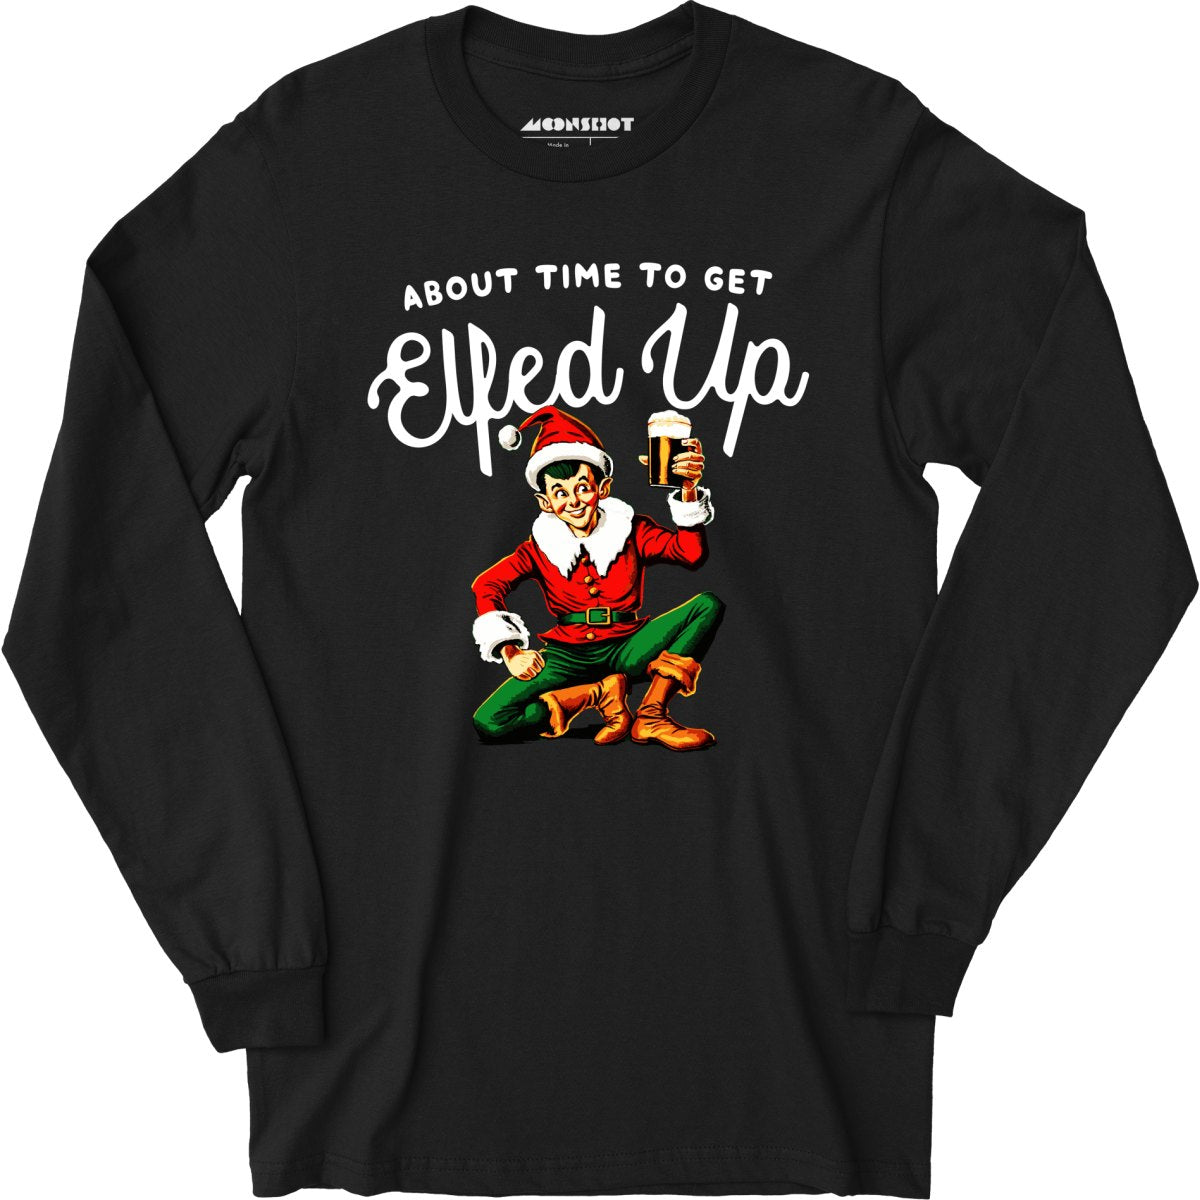 About Time to Get Elfed Up - Long Sleeve T-Shirt